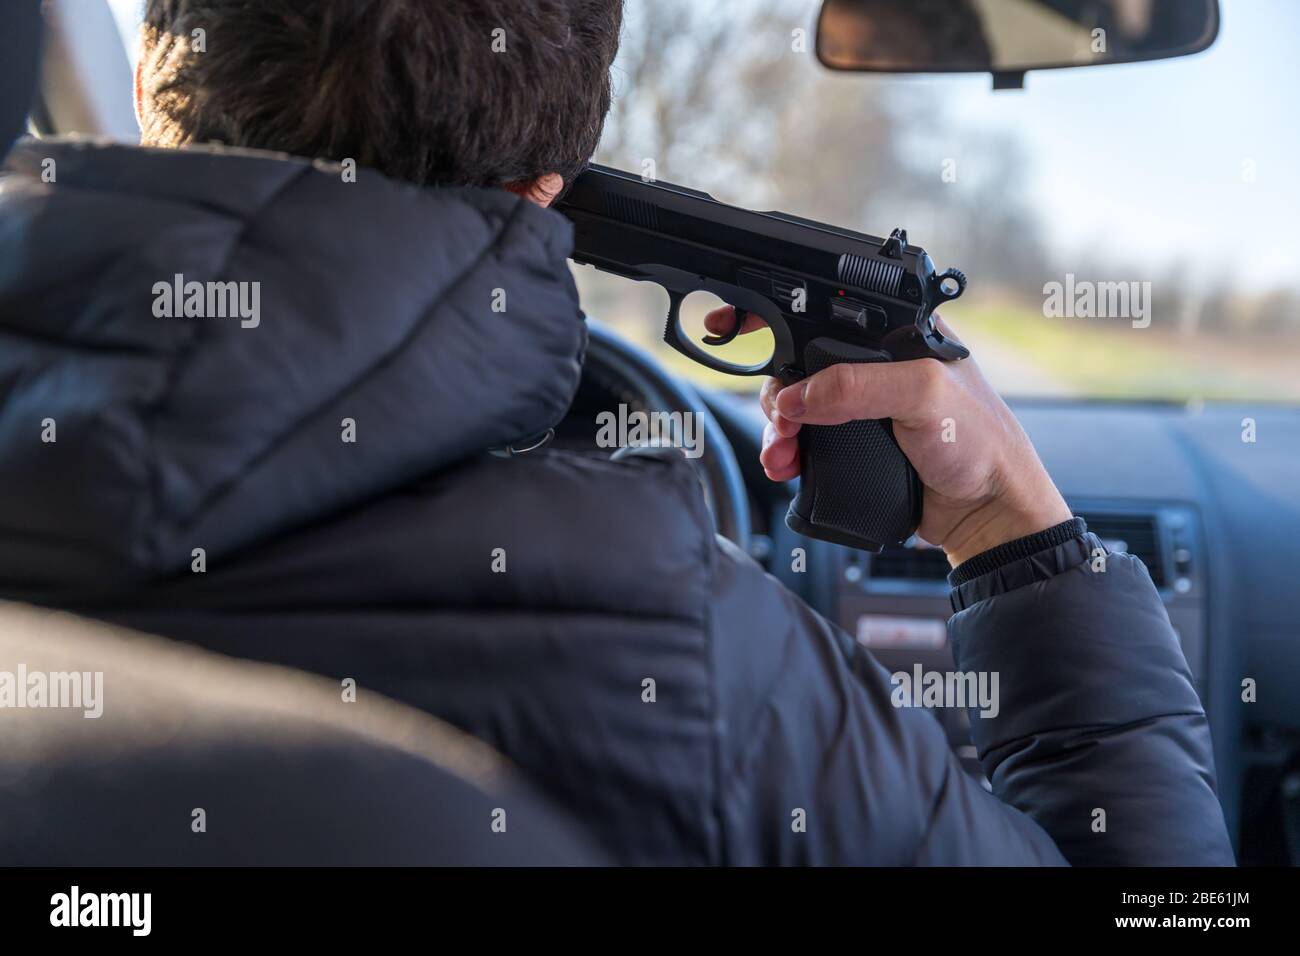 a man aiming a gun at his own head playing Russian roulette or killing himself Stock Photo